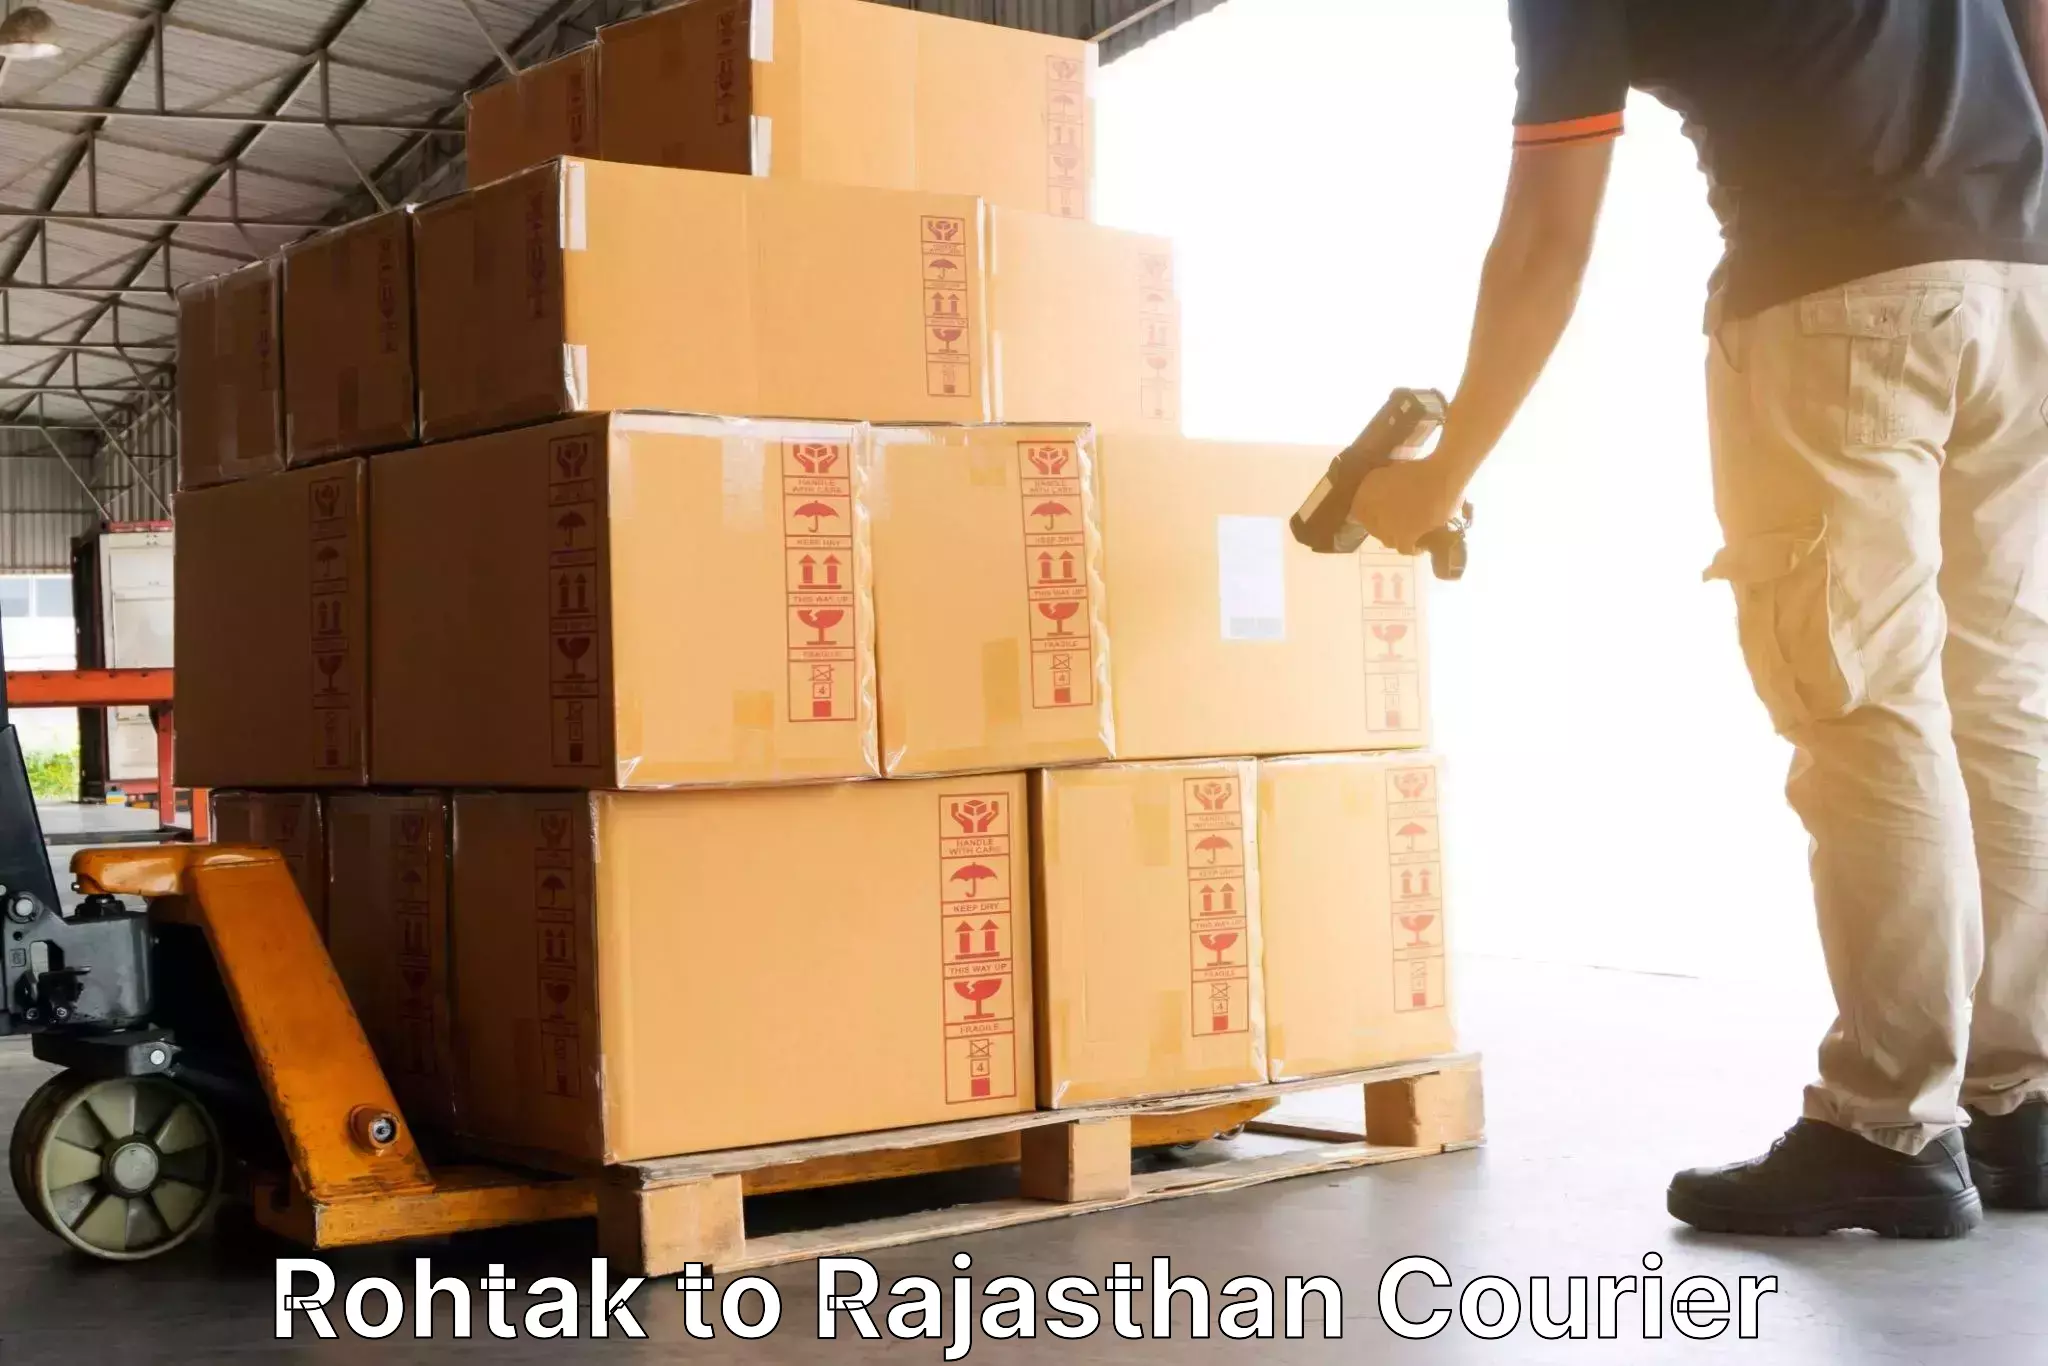 Courier service innovation in Rohtak to Nainwa